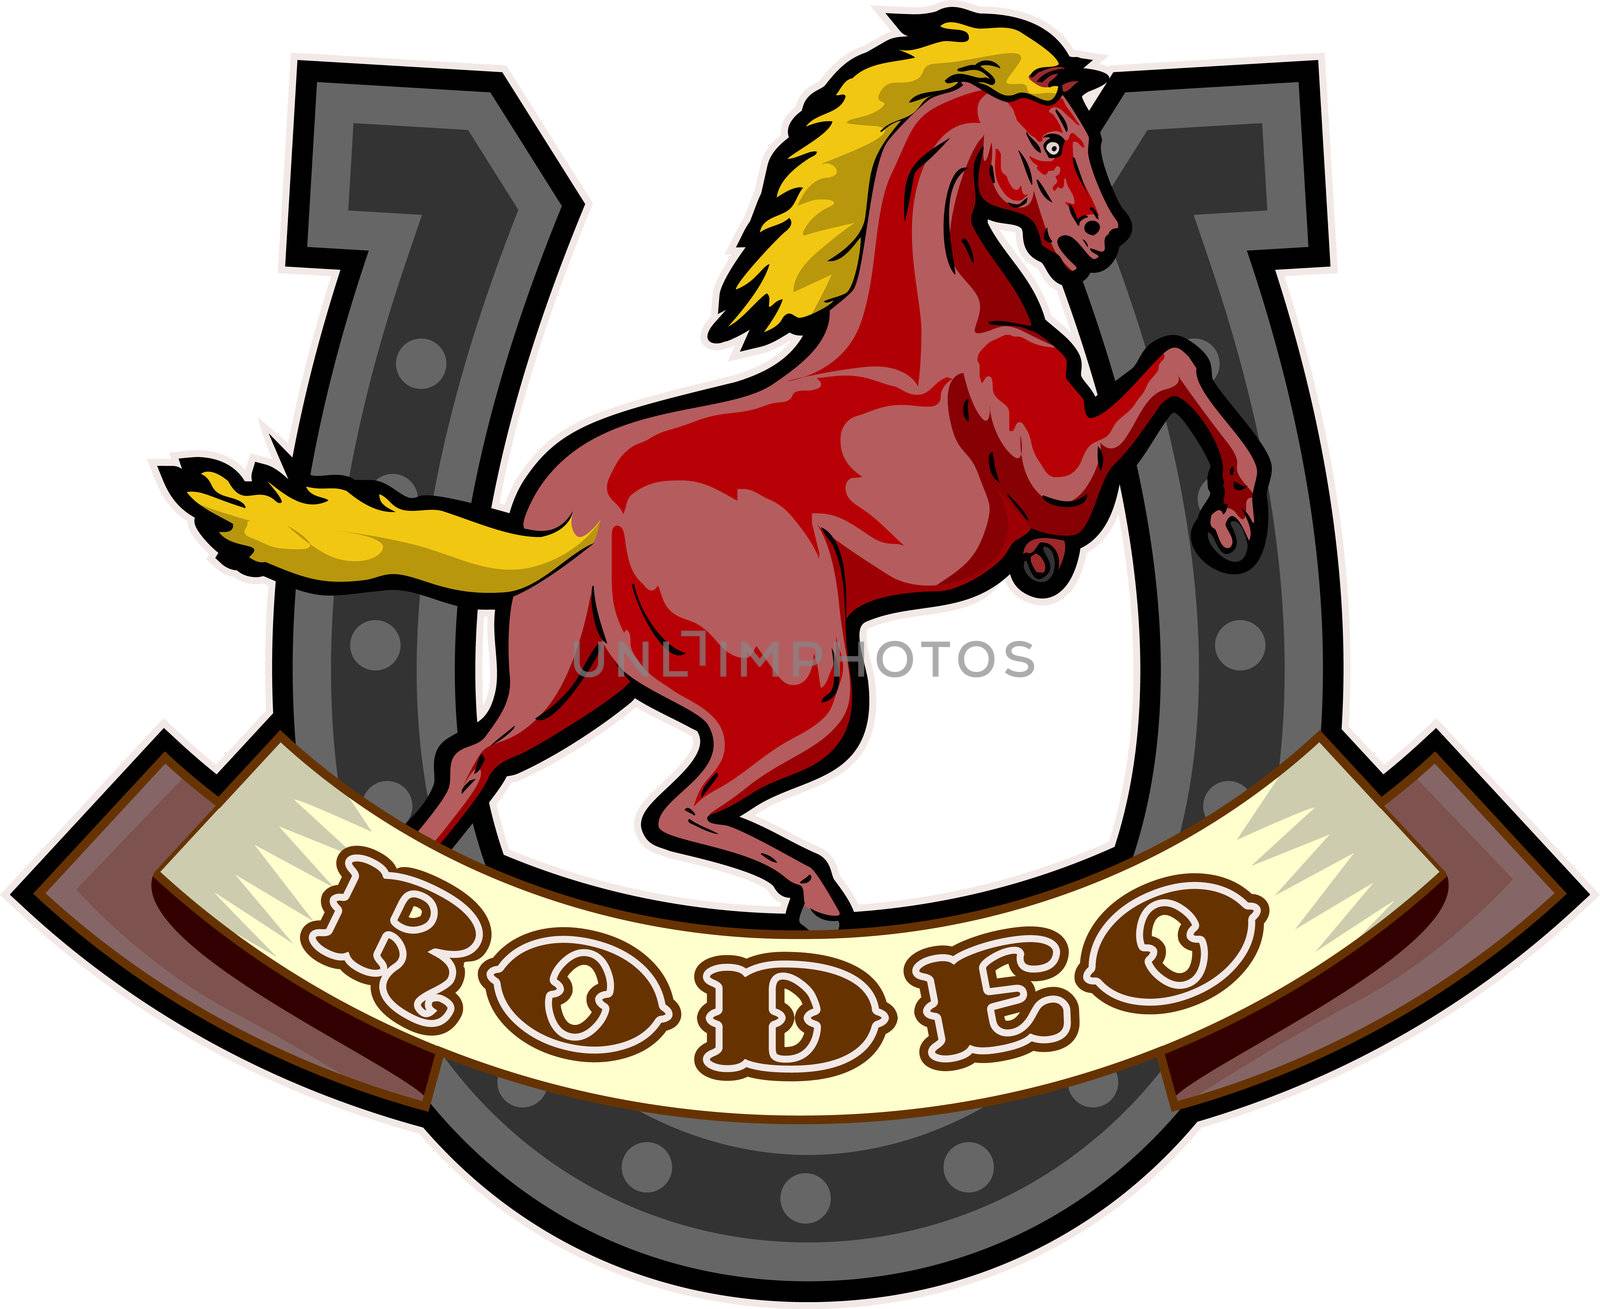 retro style illustration of a prancing horse with horseshoe in background and scroll in foreground with words "rodeo"